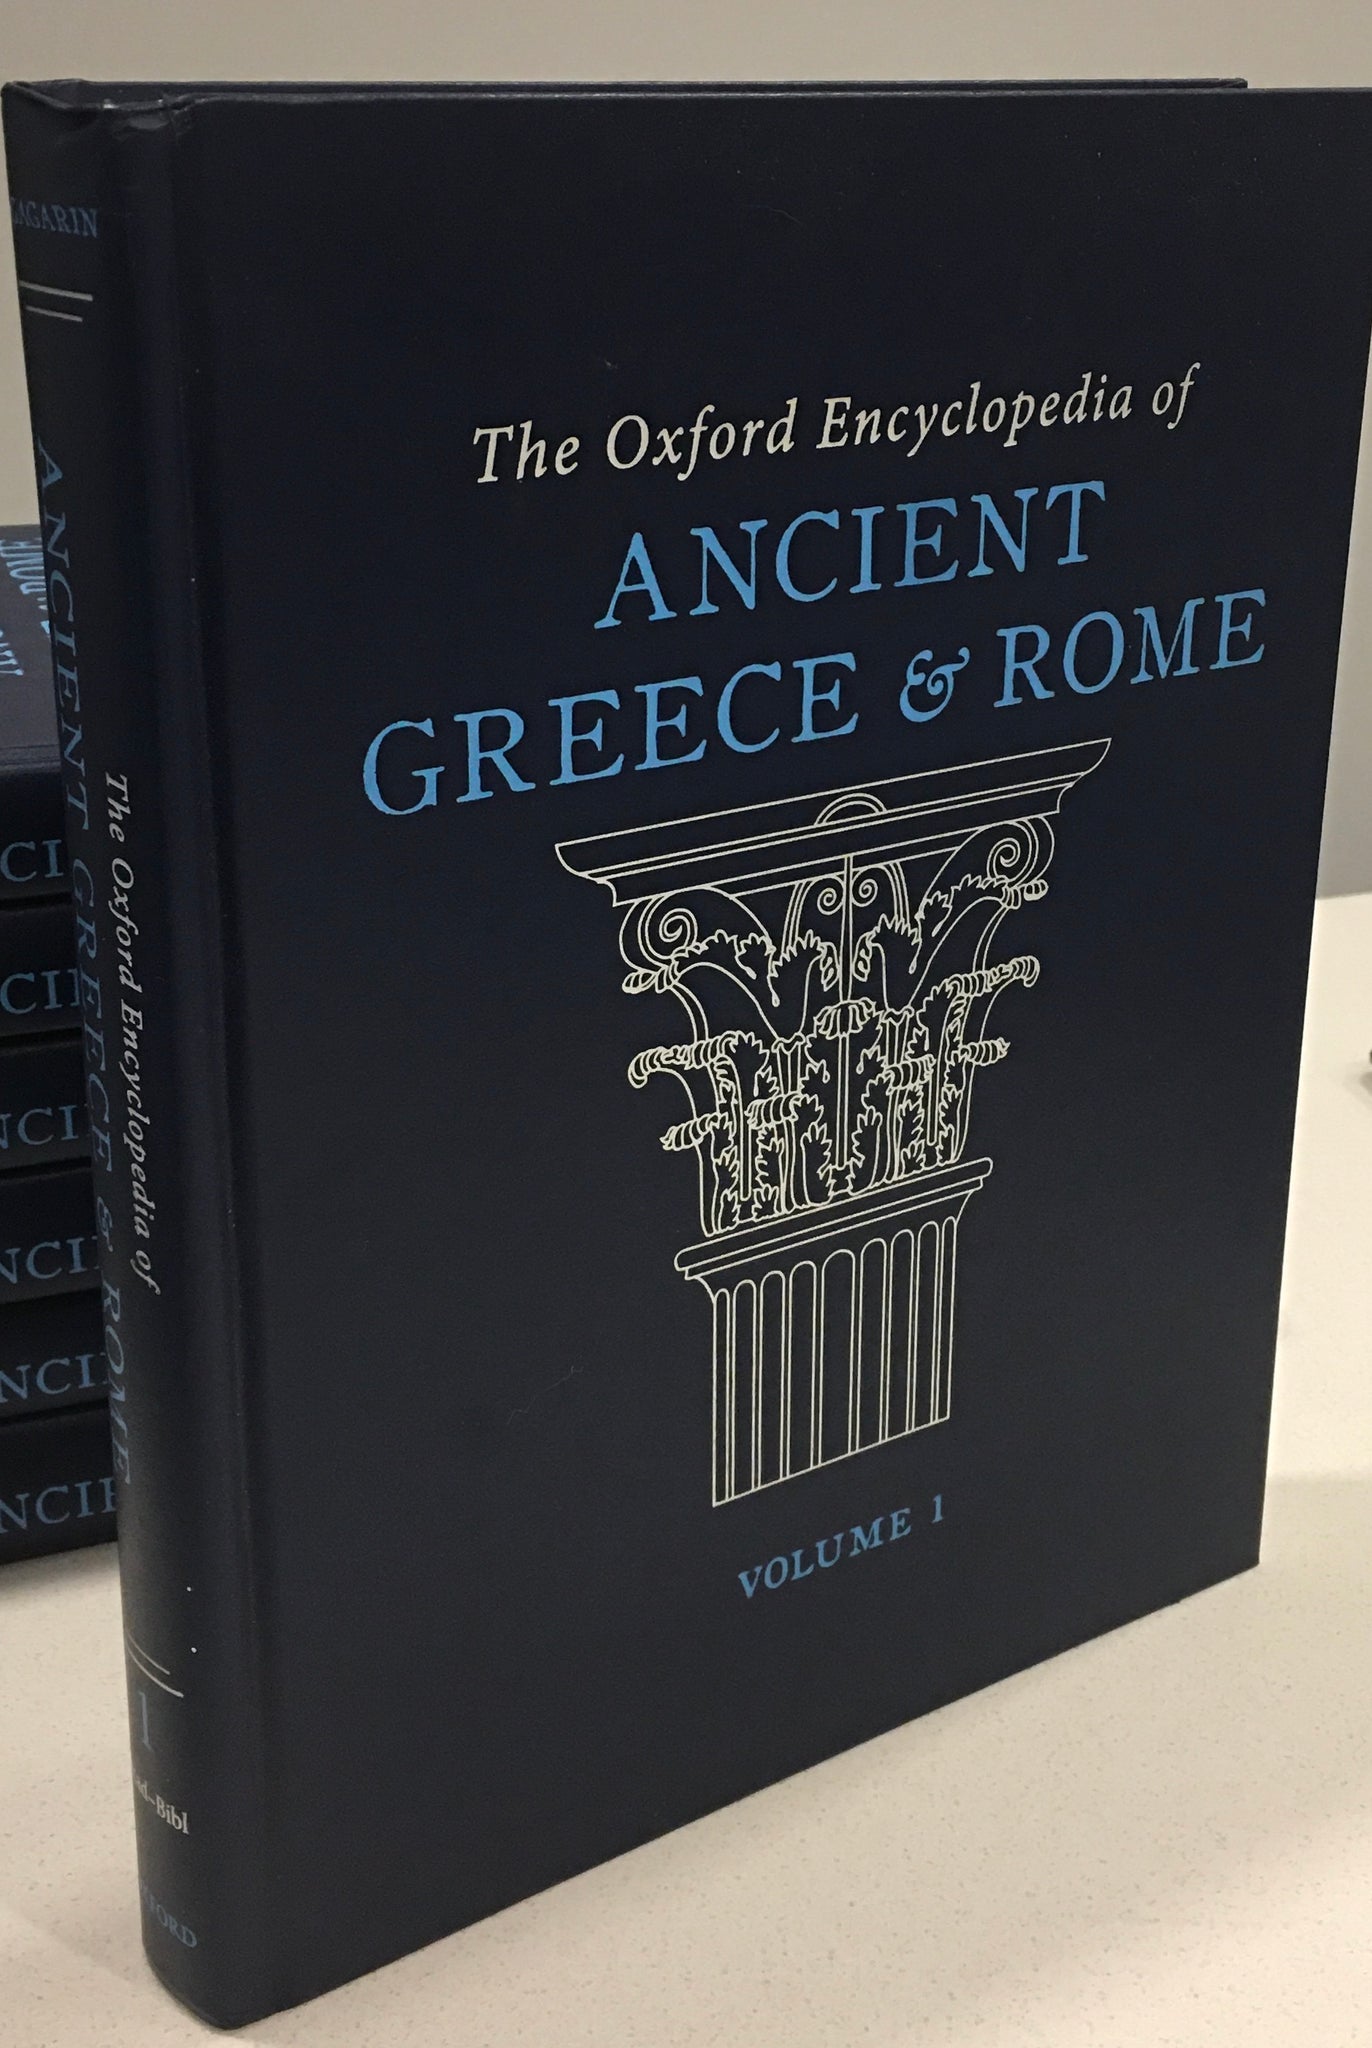 The Oxford Encyclopedia of Ancient Greece and Rome (7 Volumes)